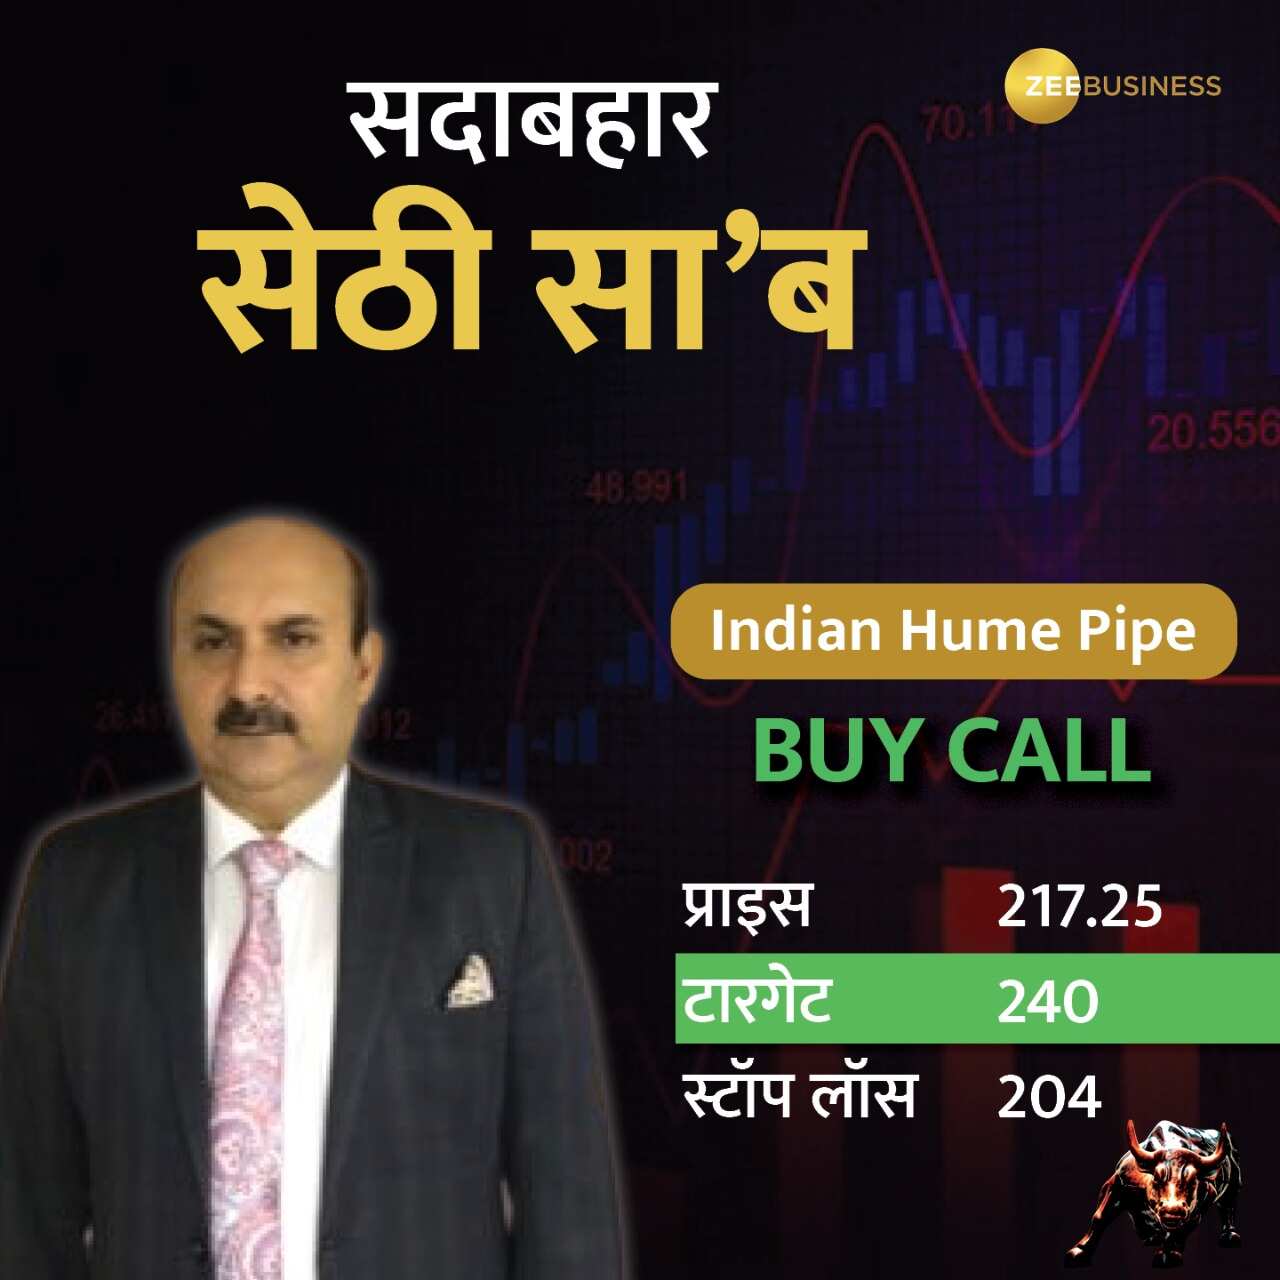 Indian Hume Pipe